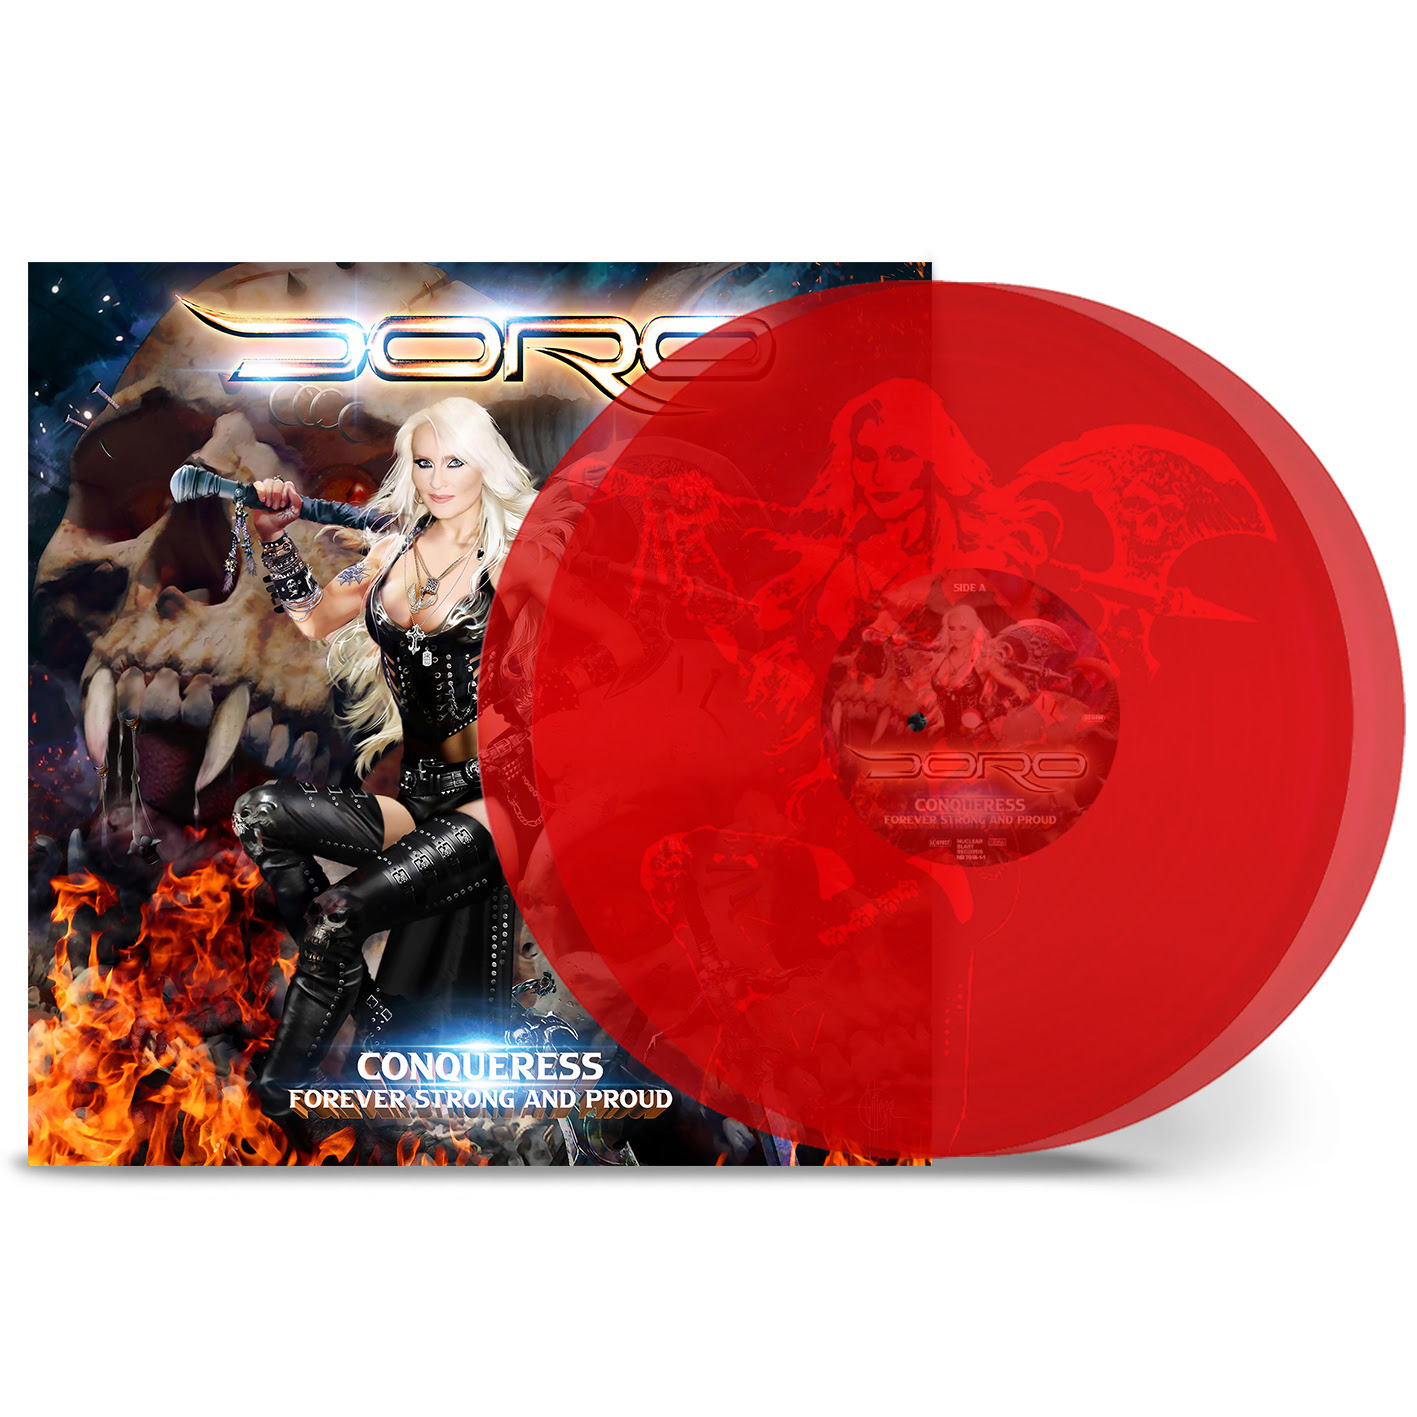 Doro releases new song 'Living After Midnight' - Distorted Sound Magazine